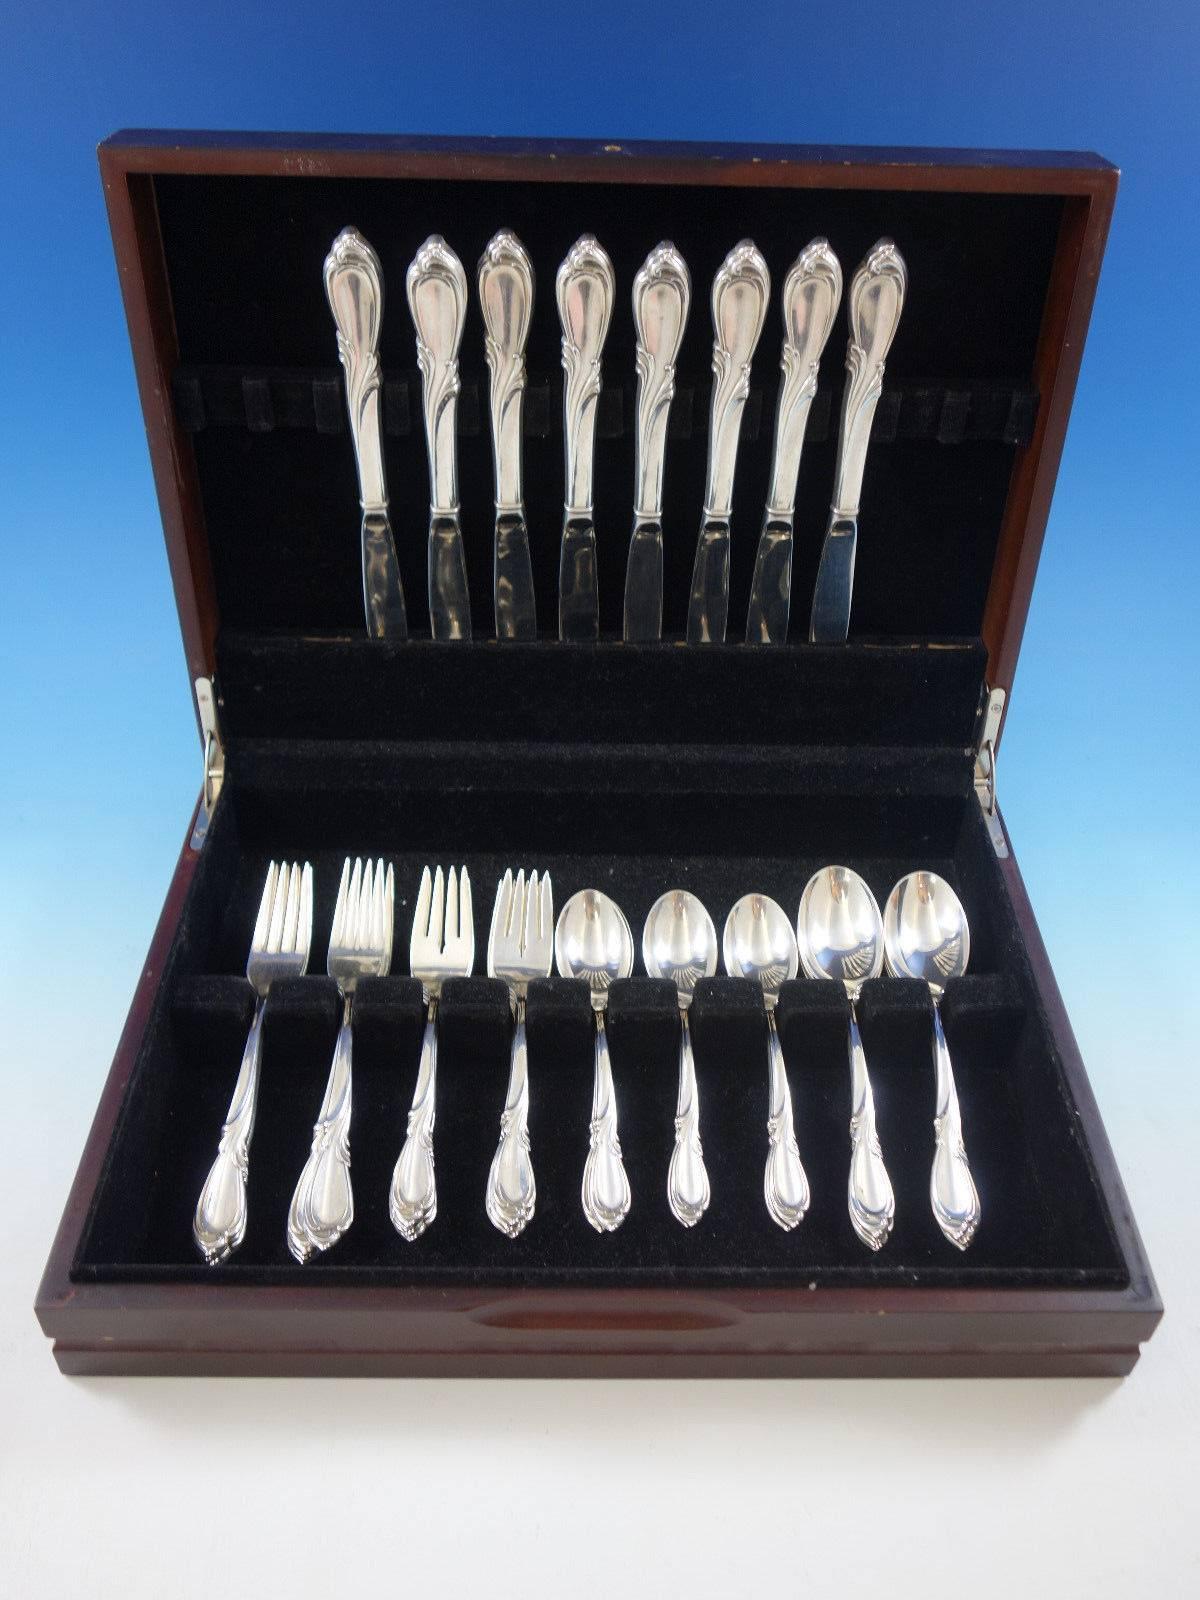 Rhapsody by International sterling silver flatware set, 40 pieces. This set includes: 

eight knives, 9 1/4